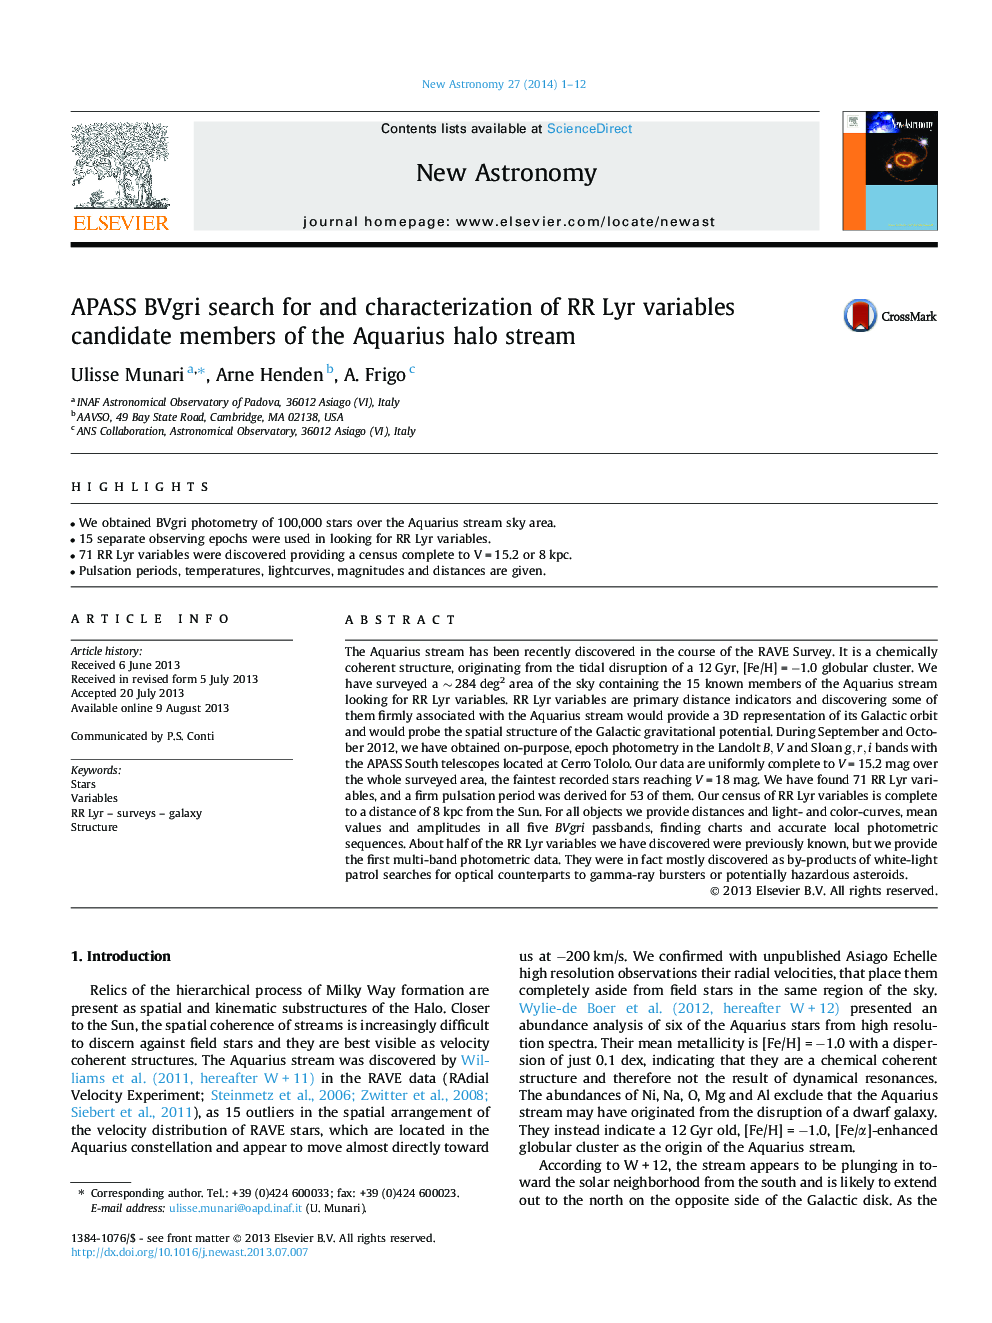 APASS BVgri search for and characterization of RR Lyr variables candidate members of the Aquarius halo stream